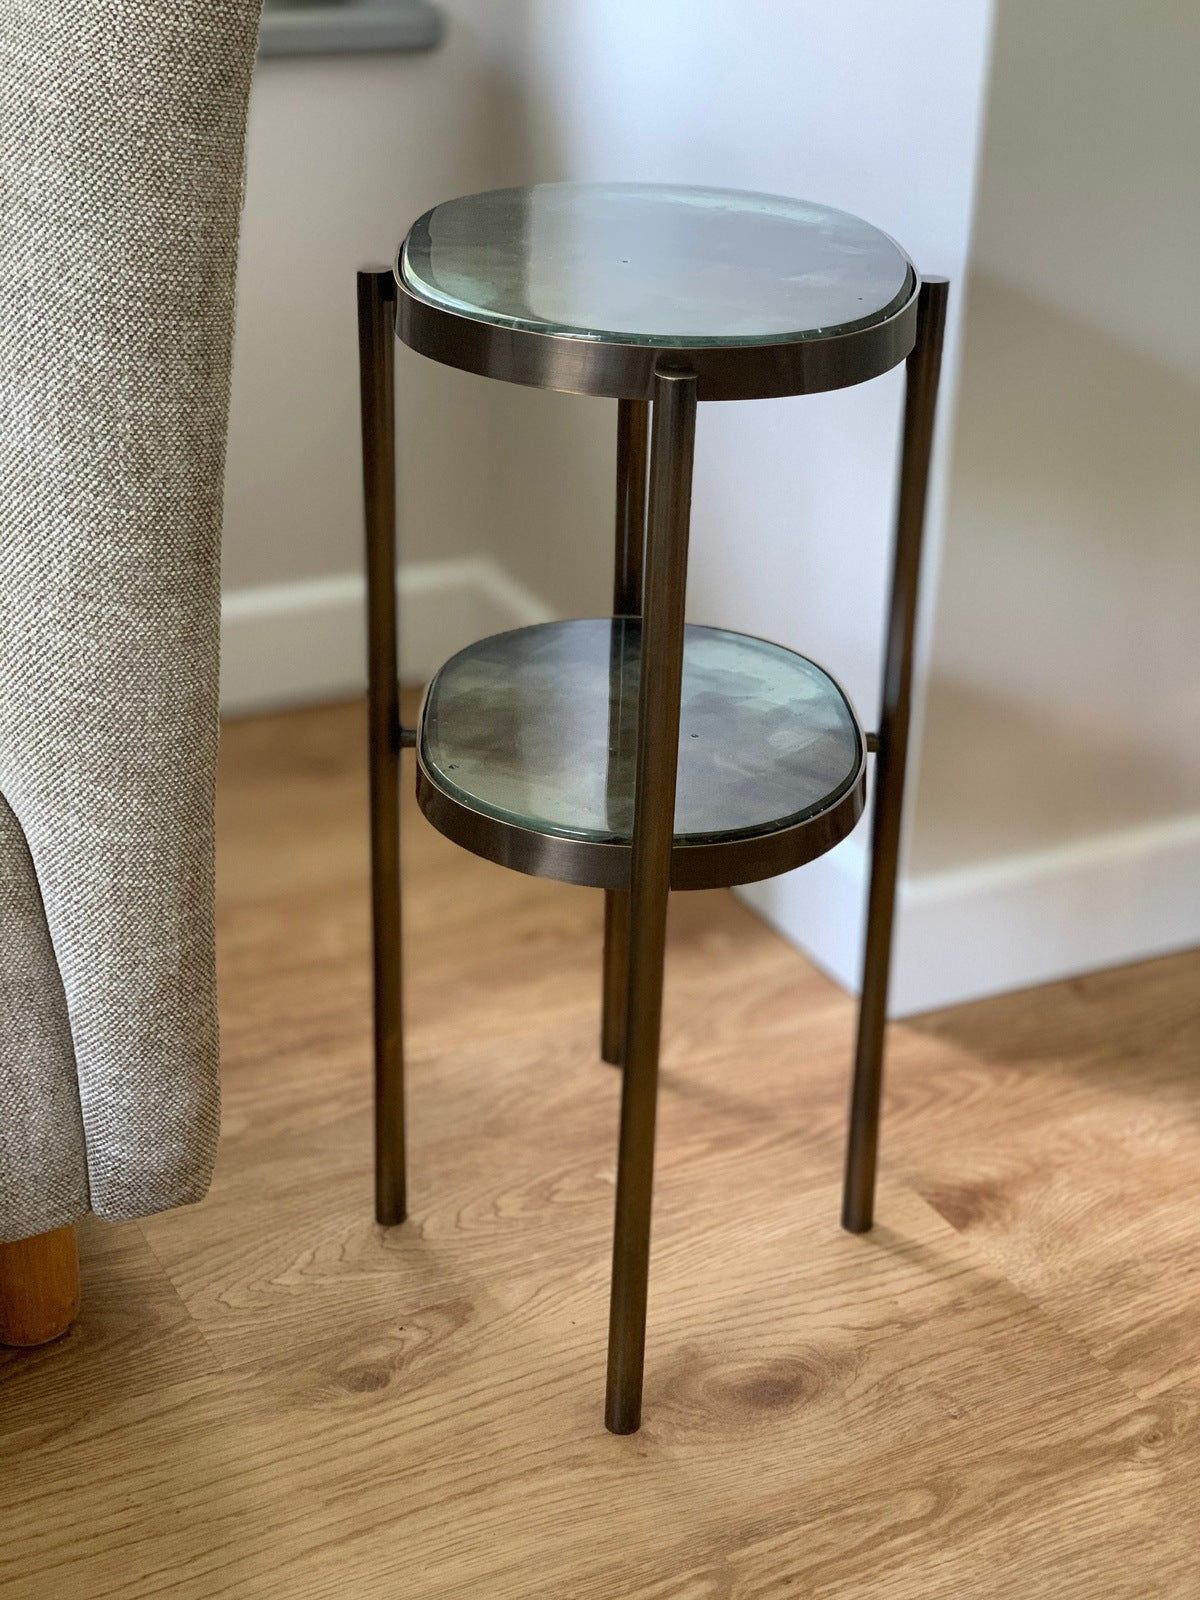 Strait doubles side table in a modern house